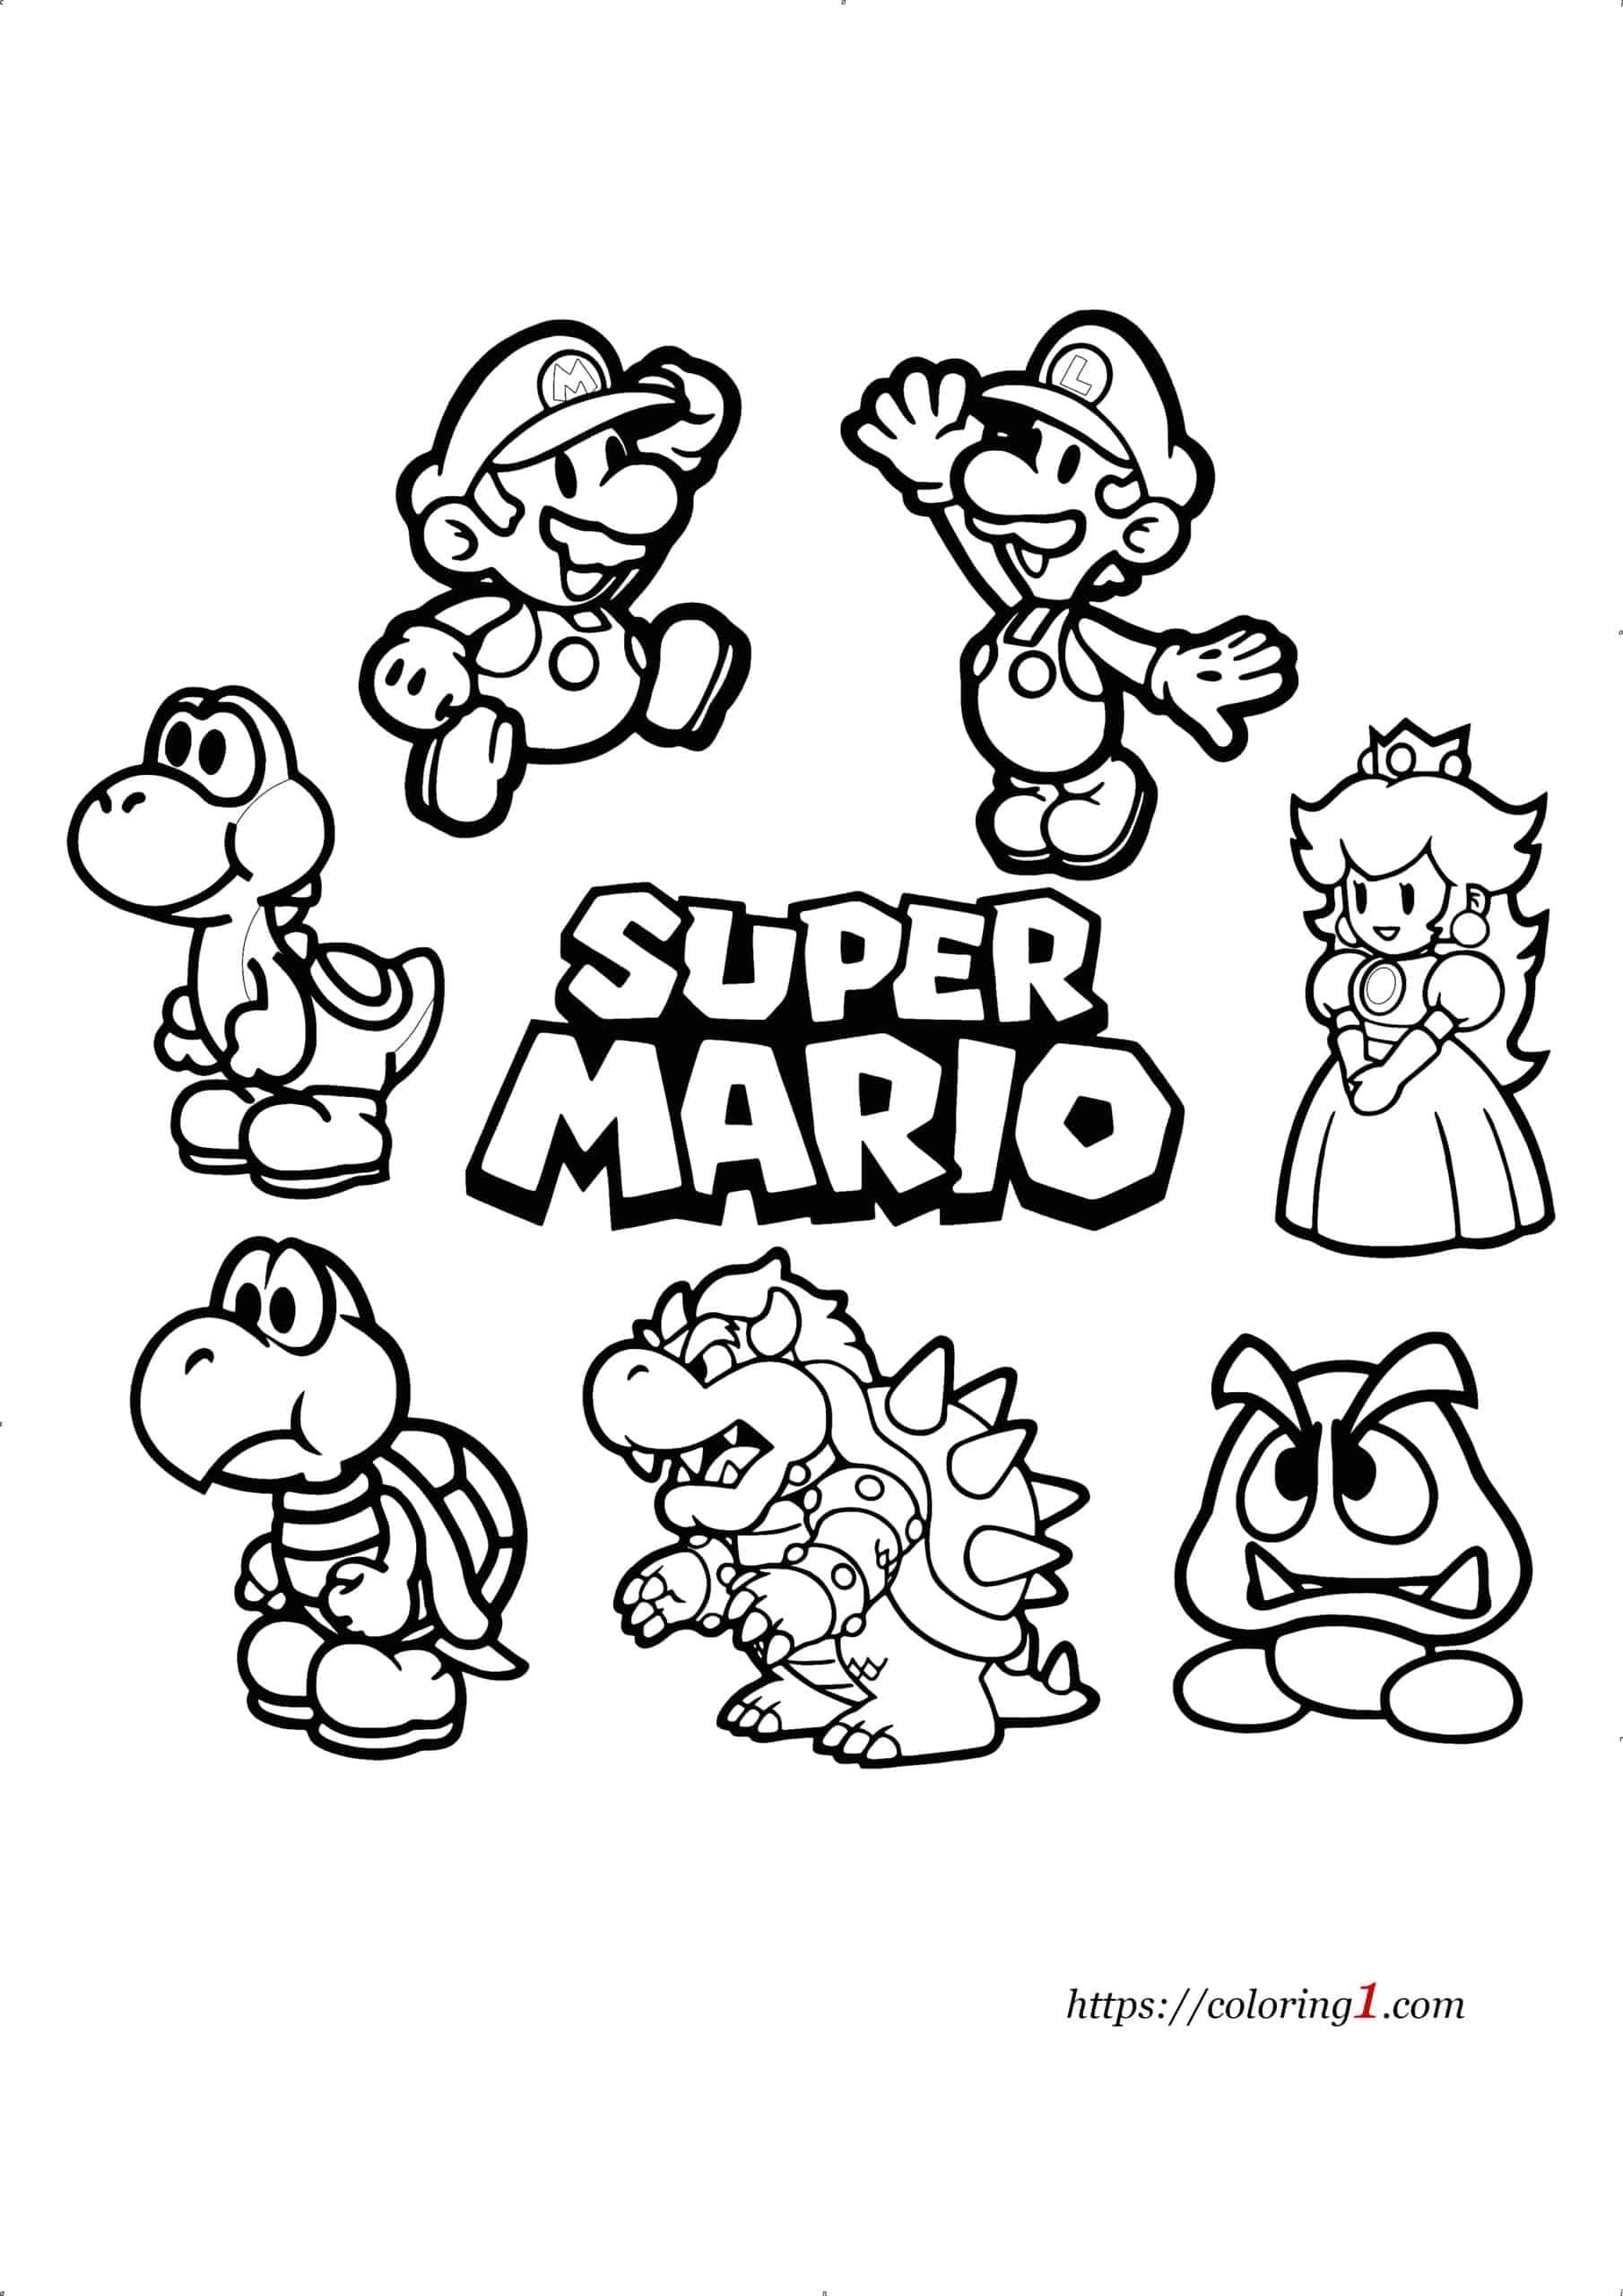 Mario characters mario coloring pages super mario coloring pages coloring pages